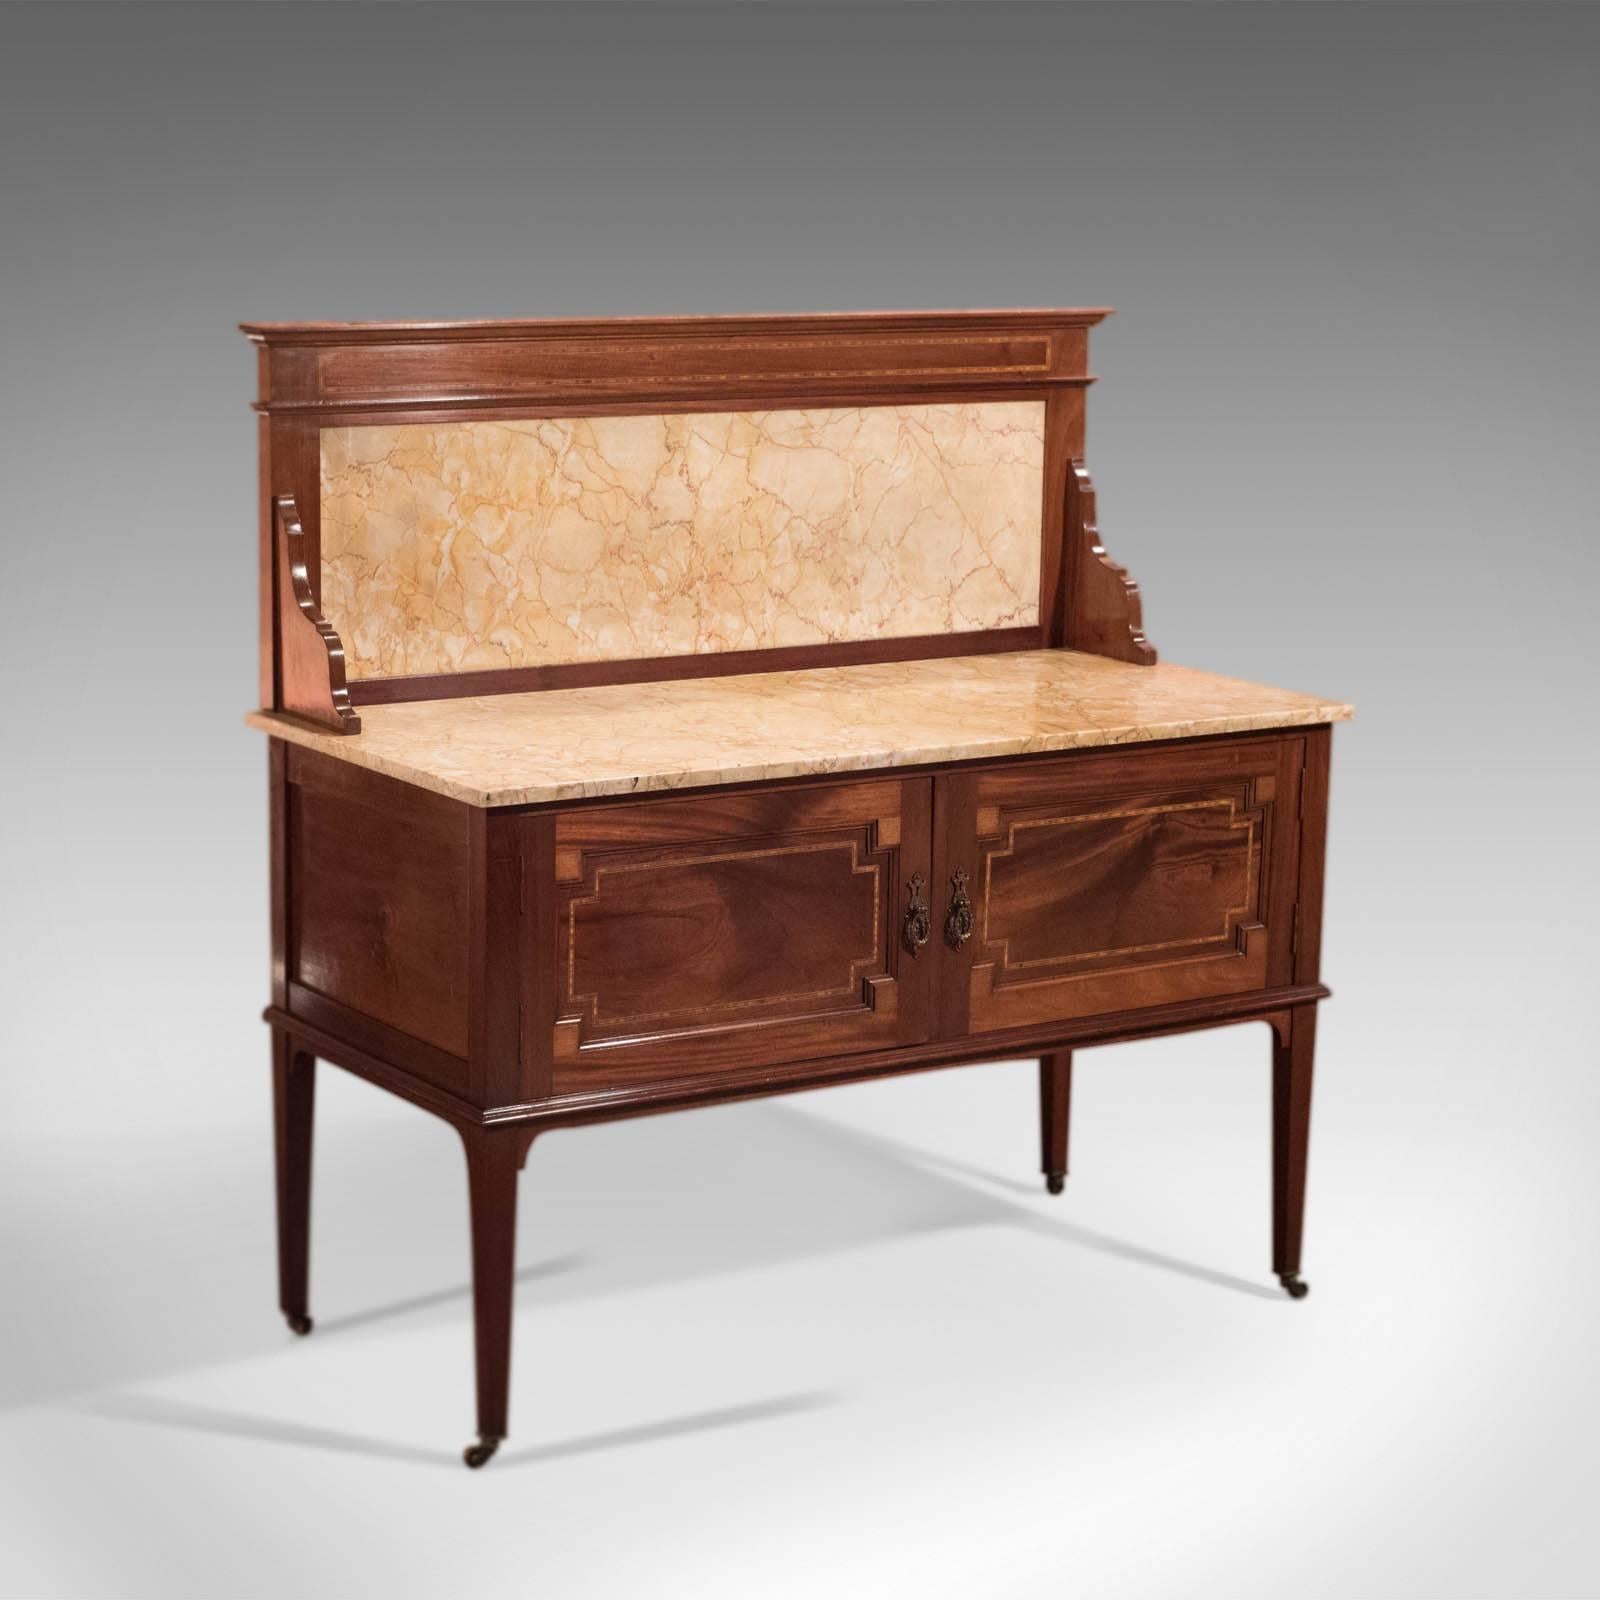 This is an antique, Edwardian, marble top wash stand in mahogany dating to circa 1910.

In fine proportion, of superior quality and rare to find one this size, this washstand is delightful as is or could be easily adapted for the modern bathroom